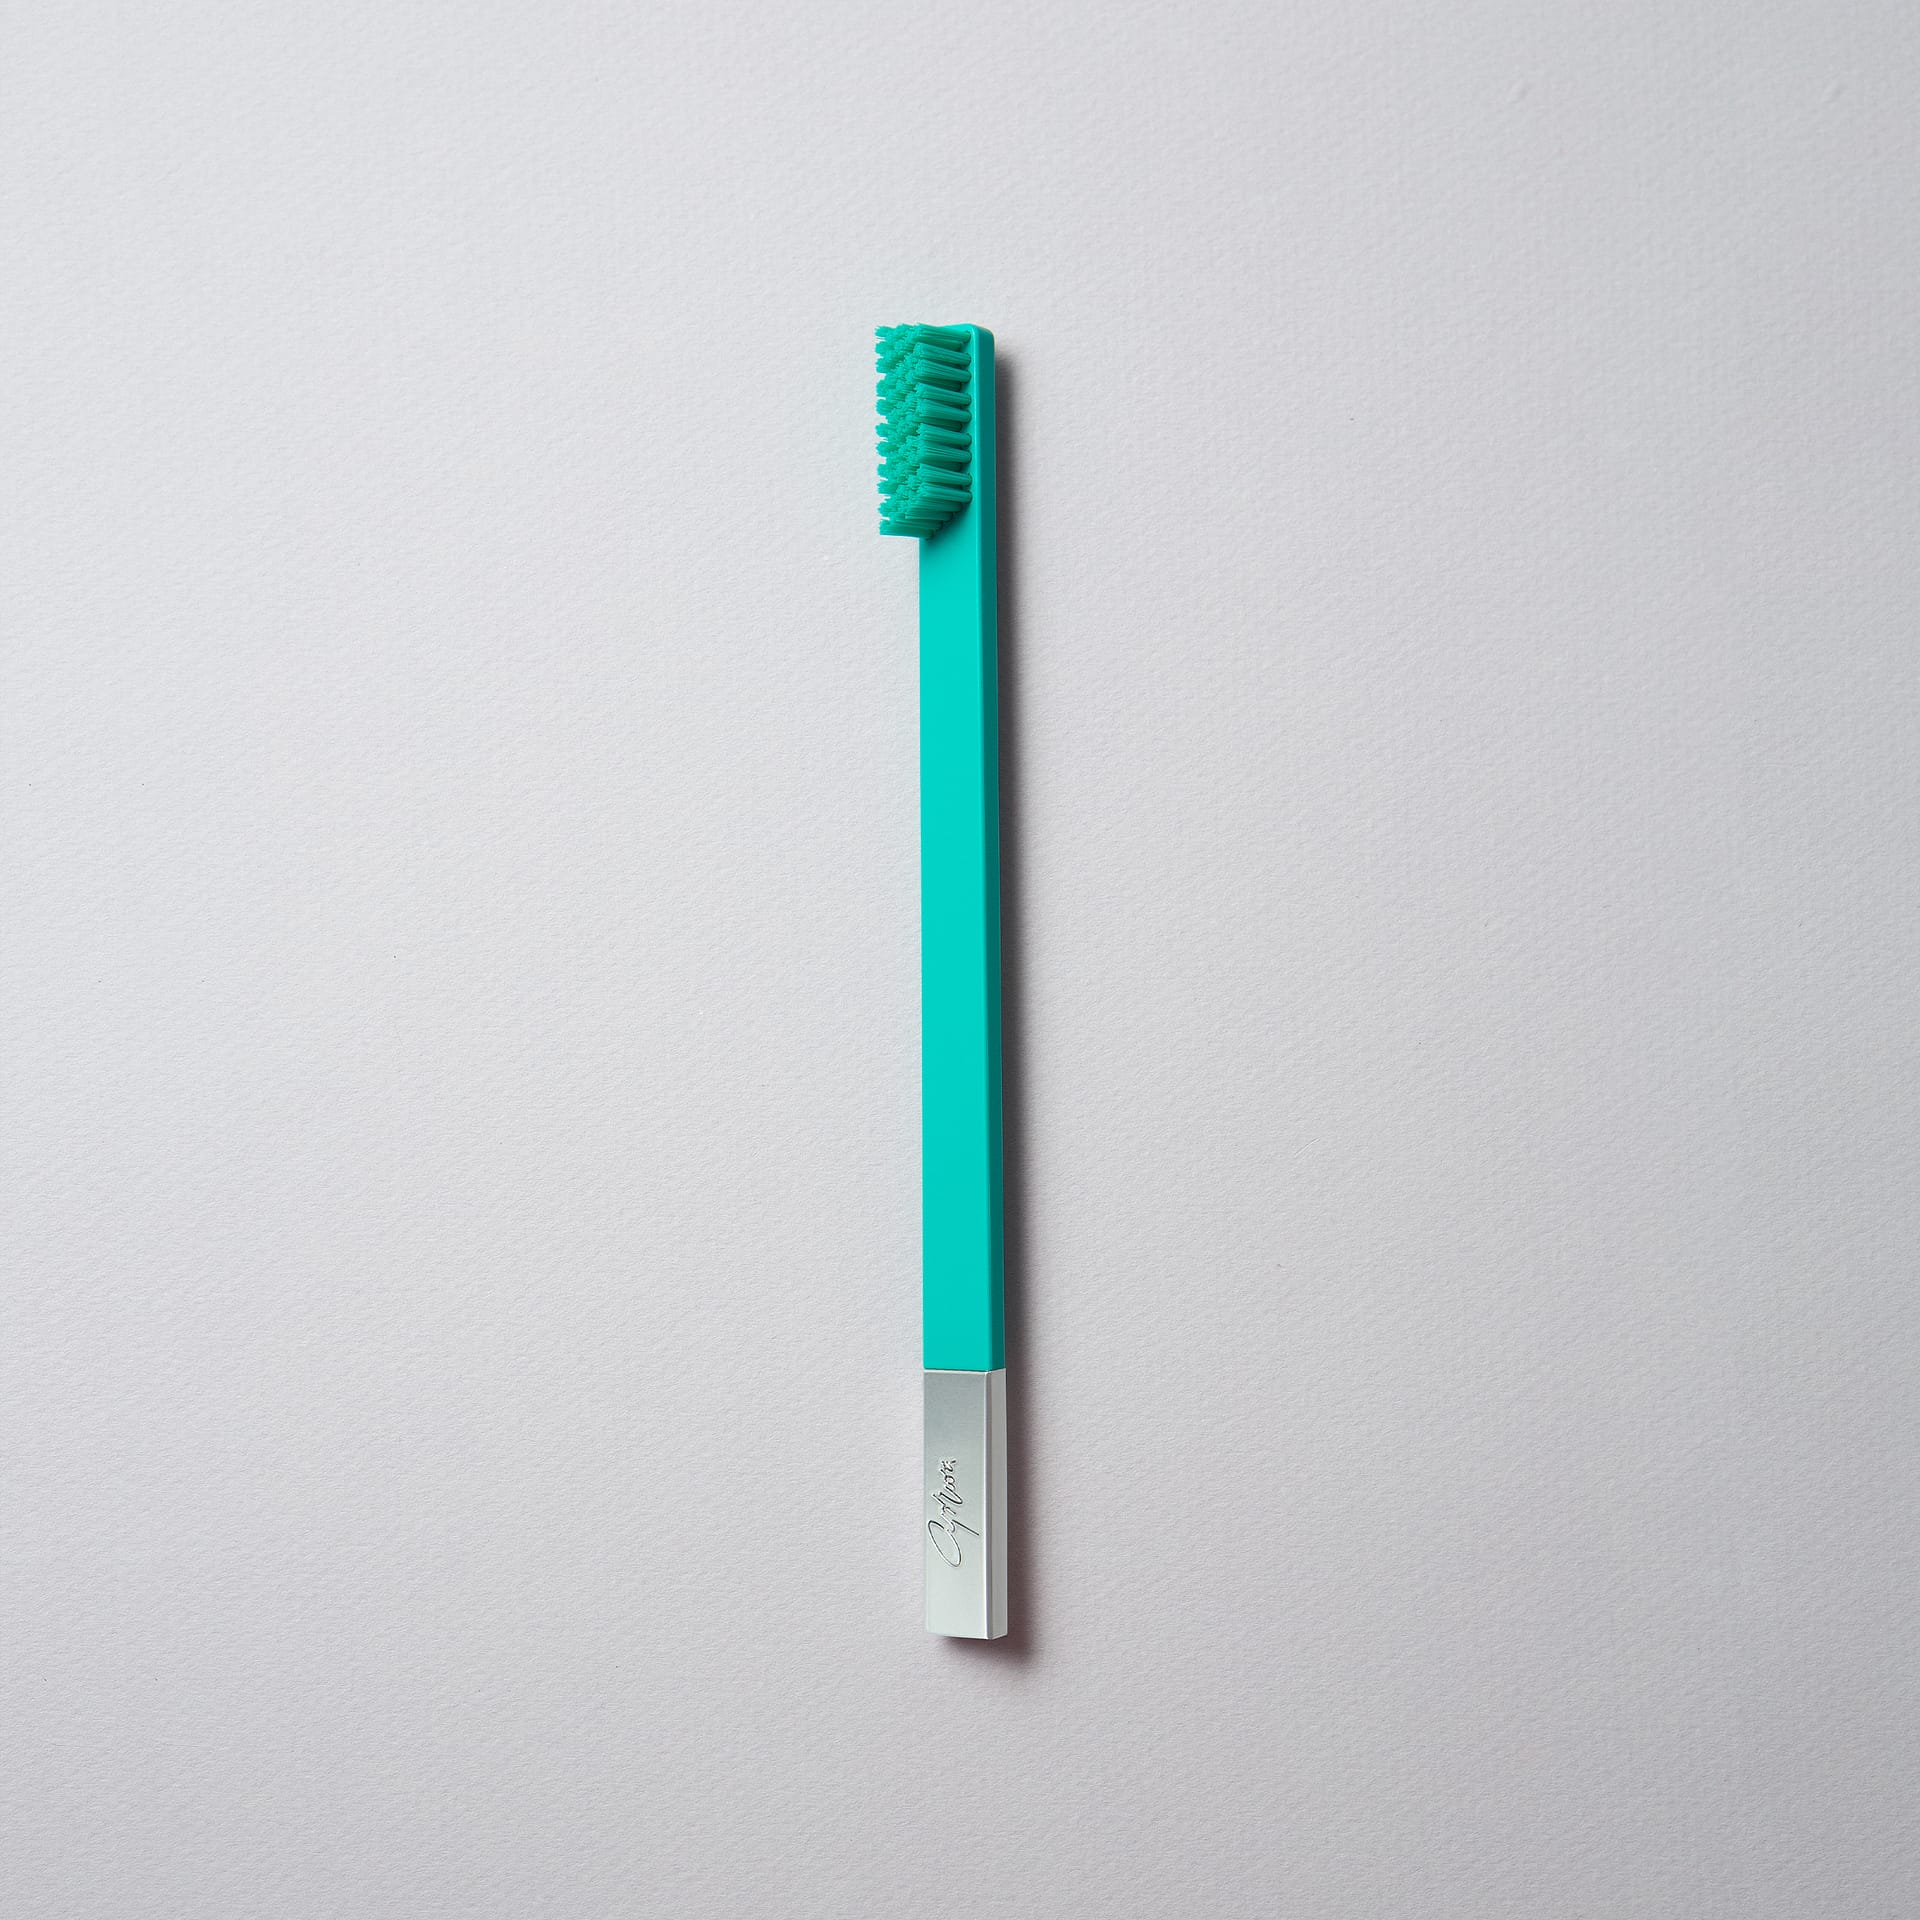 slim-by-apriori-turquoise-blue-silver-toothbrush-1